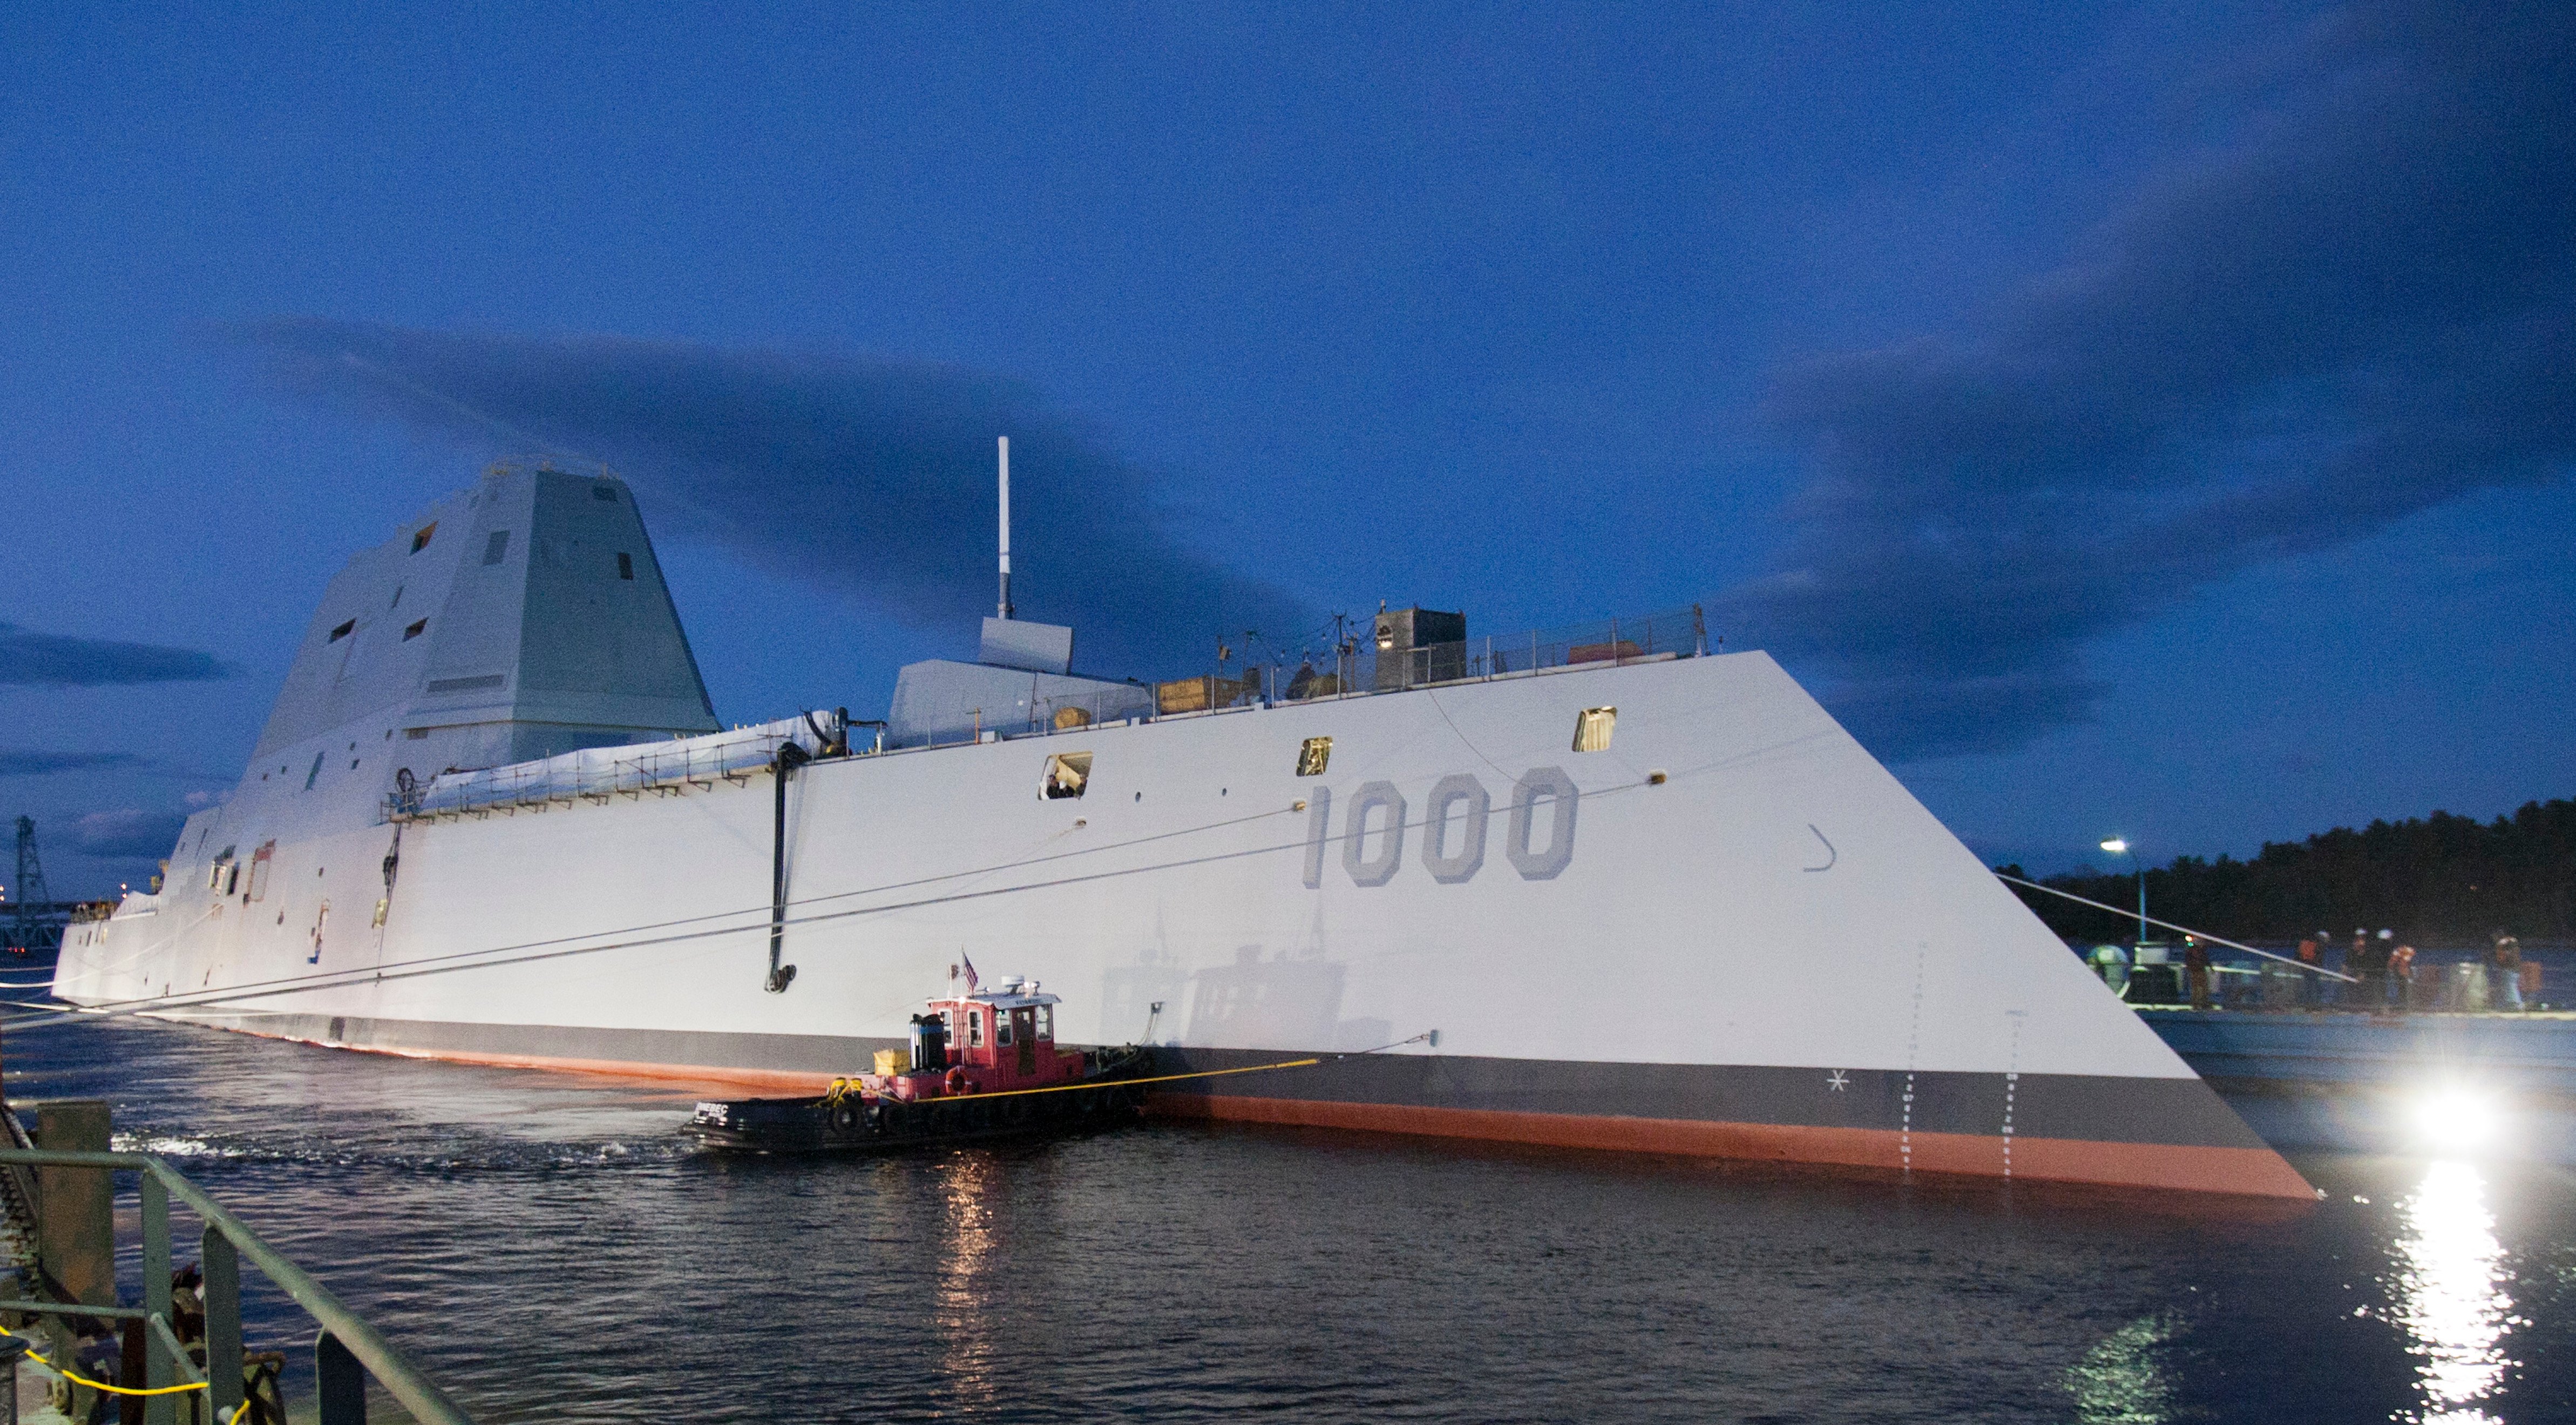 Zumwalt-class guided-missile destroyer DDG 1000 is floated out of dry dock at the General Dynamics Bath Iron Works shipyard on Oct. 28, 2013. US Navy Photo